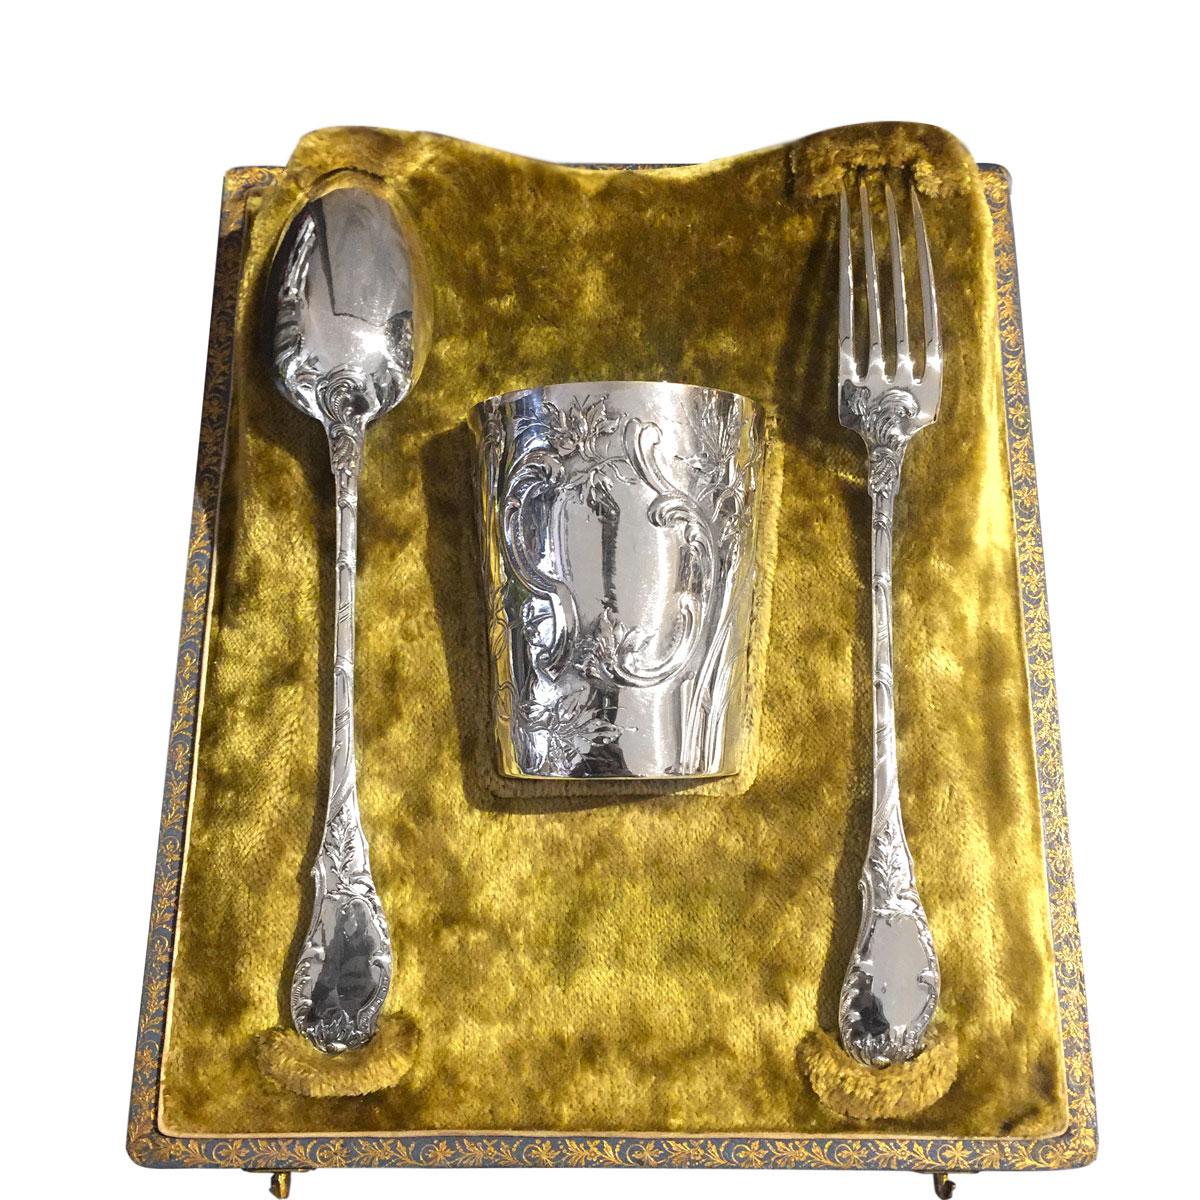 Christening set in French sterling silver composed of 3 pieces: 1 cup, 1 fork, and 1 spoon.
Very delicate model in the Louis XV style with a lovely chiseled decor of C-scrolls and foliage.

Stamped with the French Minerve mark for sterling